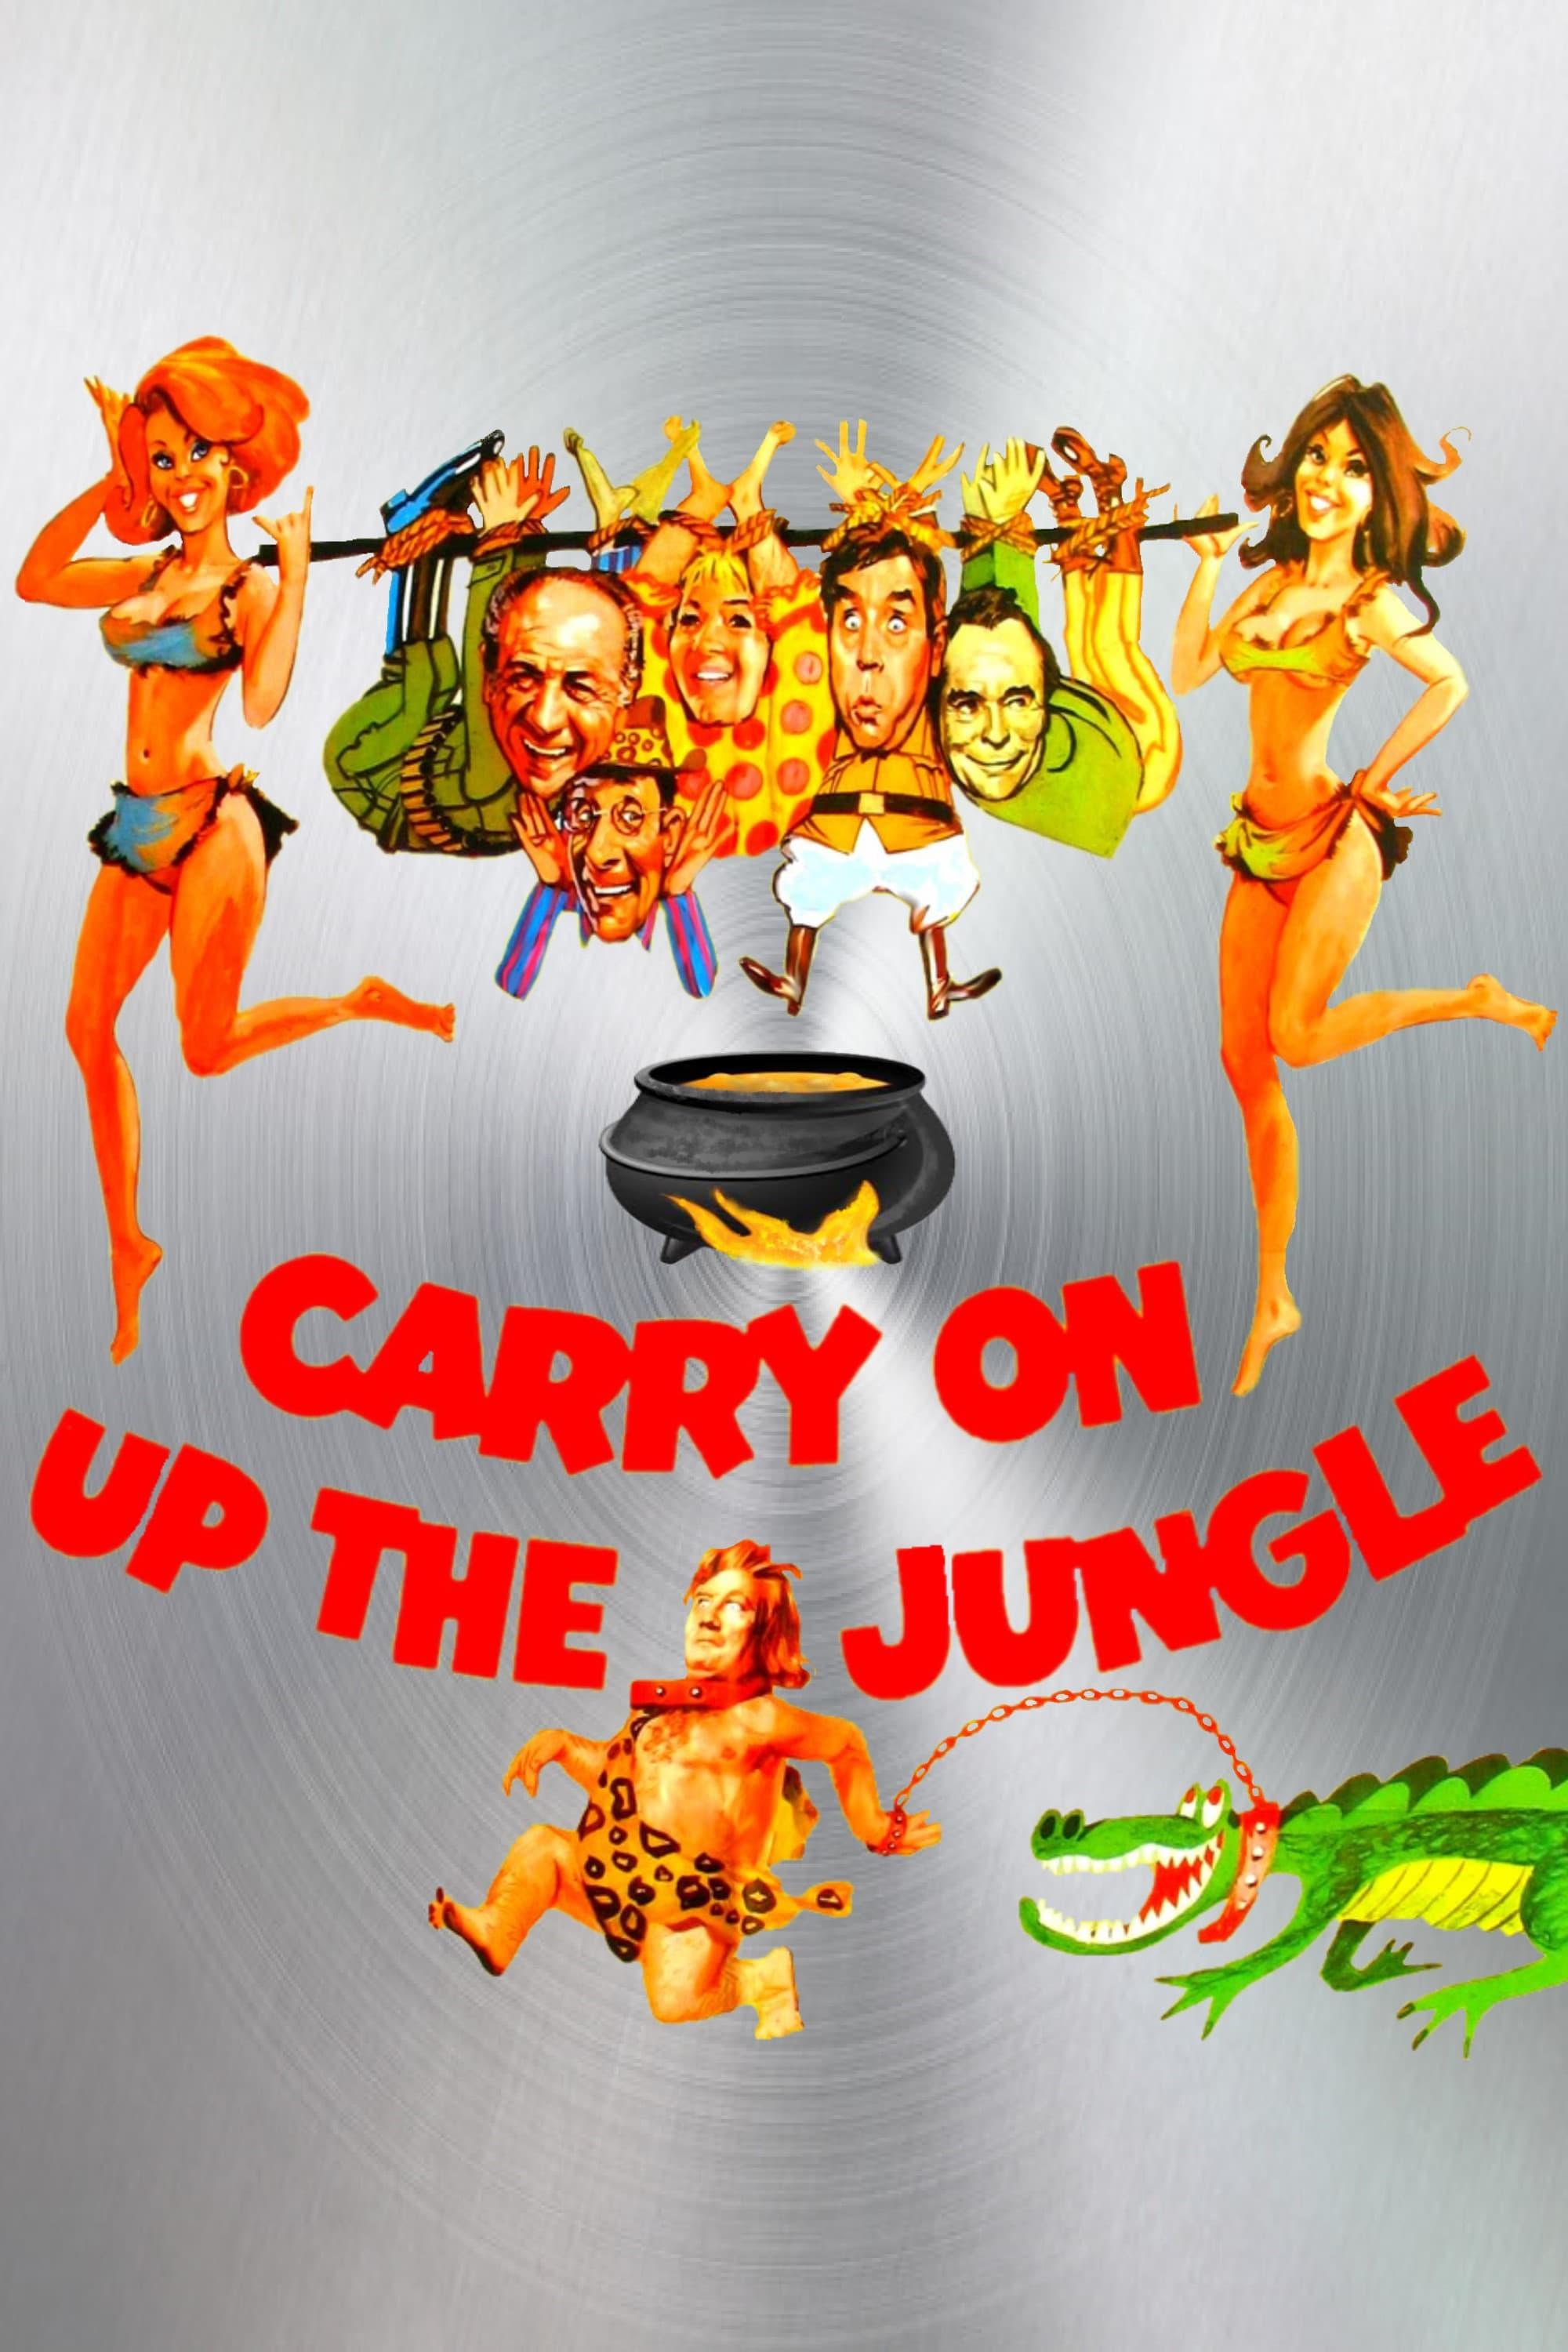 Carry On Up the Jungle poster